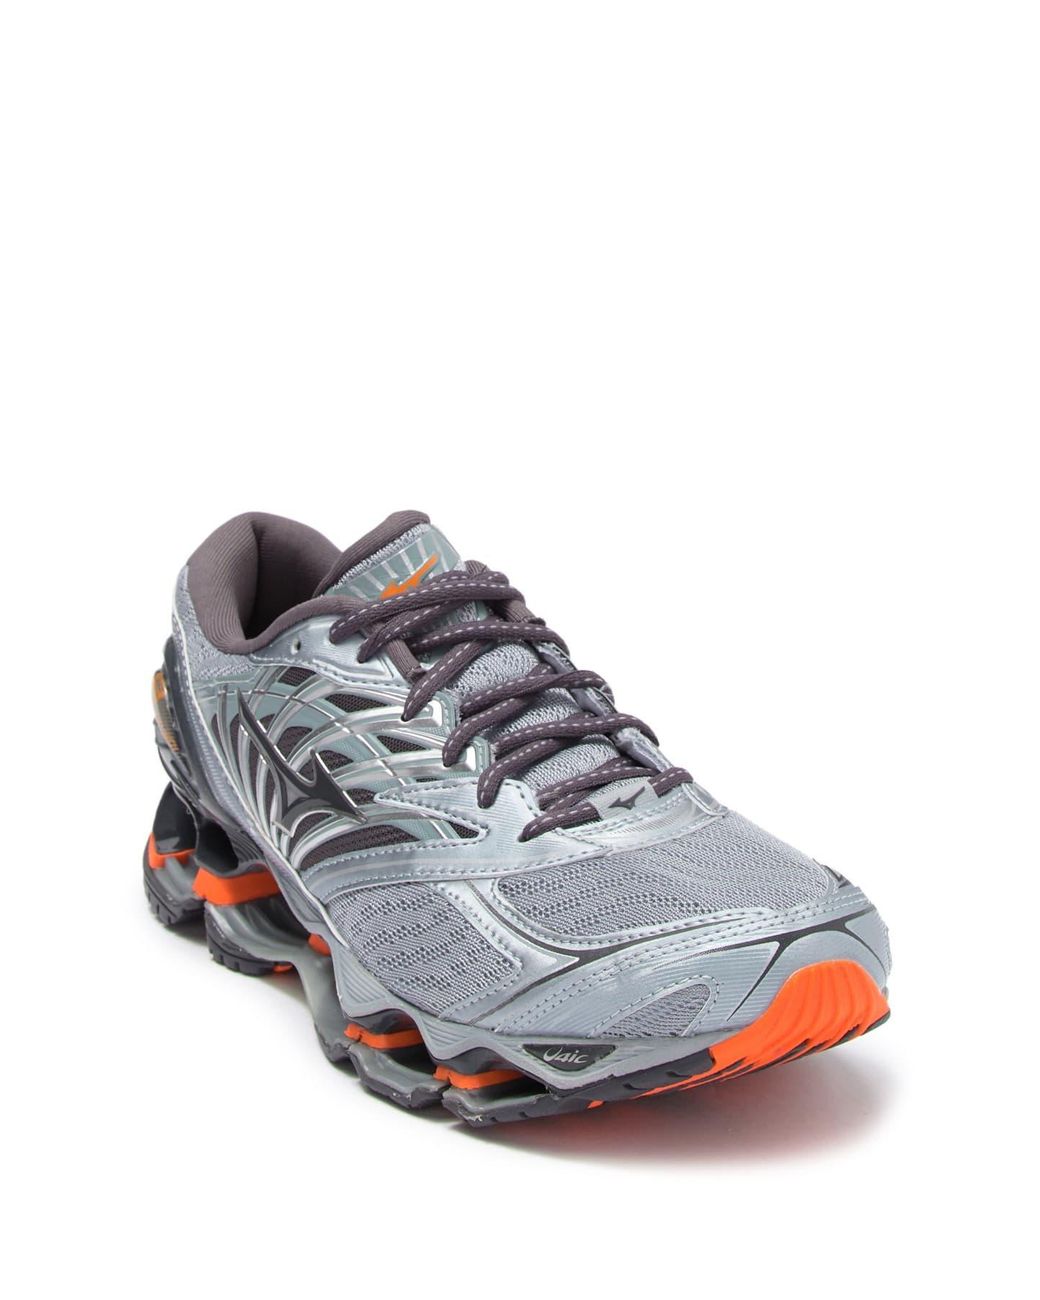 Mizuno Synthetic Wave Prophecy 8 (quarry/graphite) Men's Running Shoes for  Men | Lyst